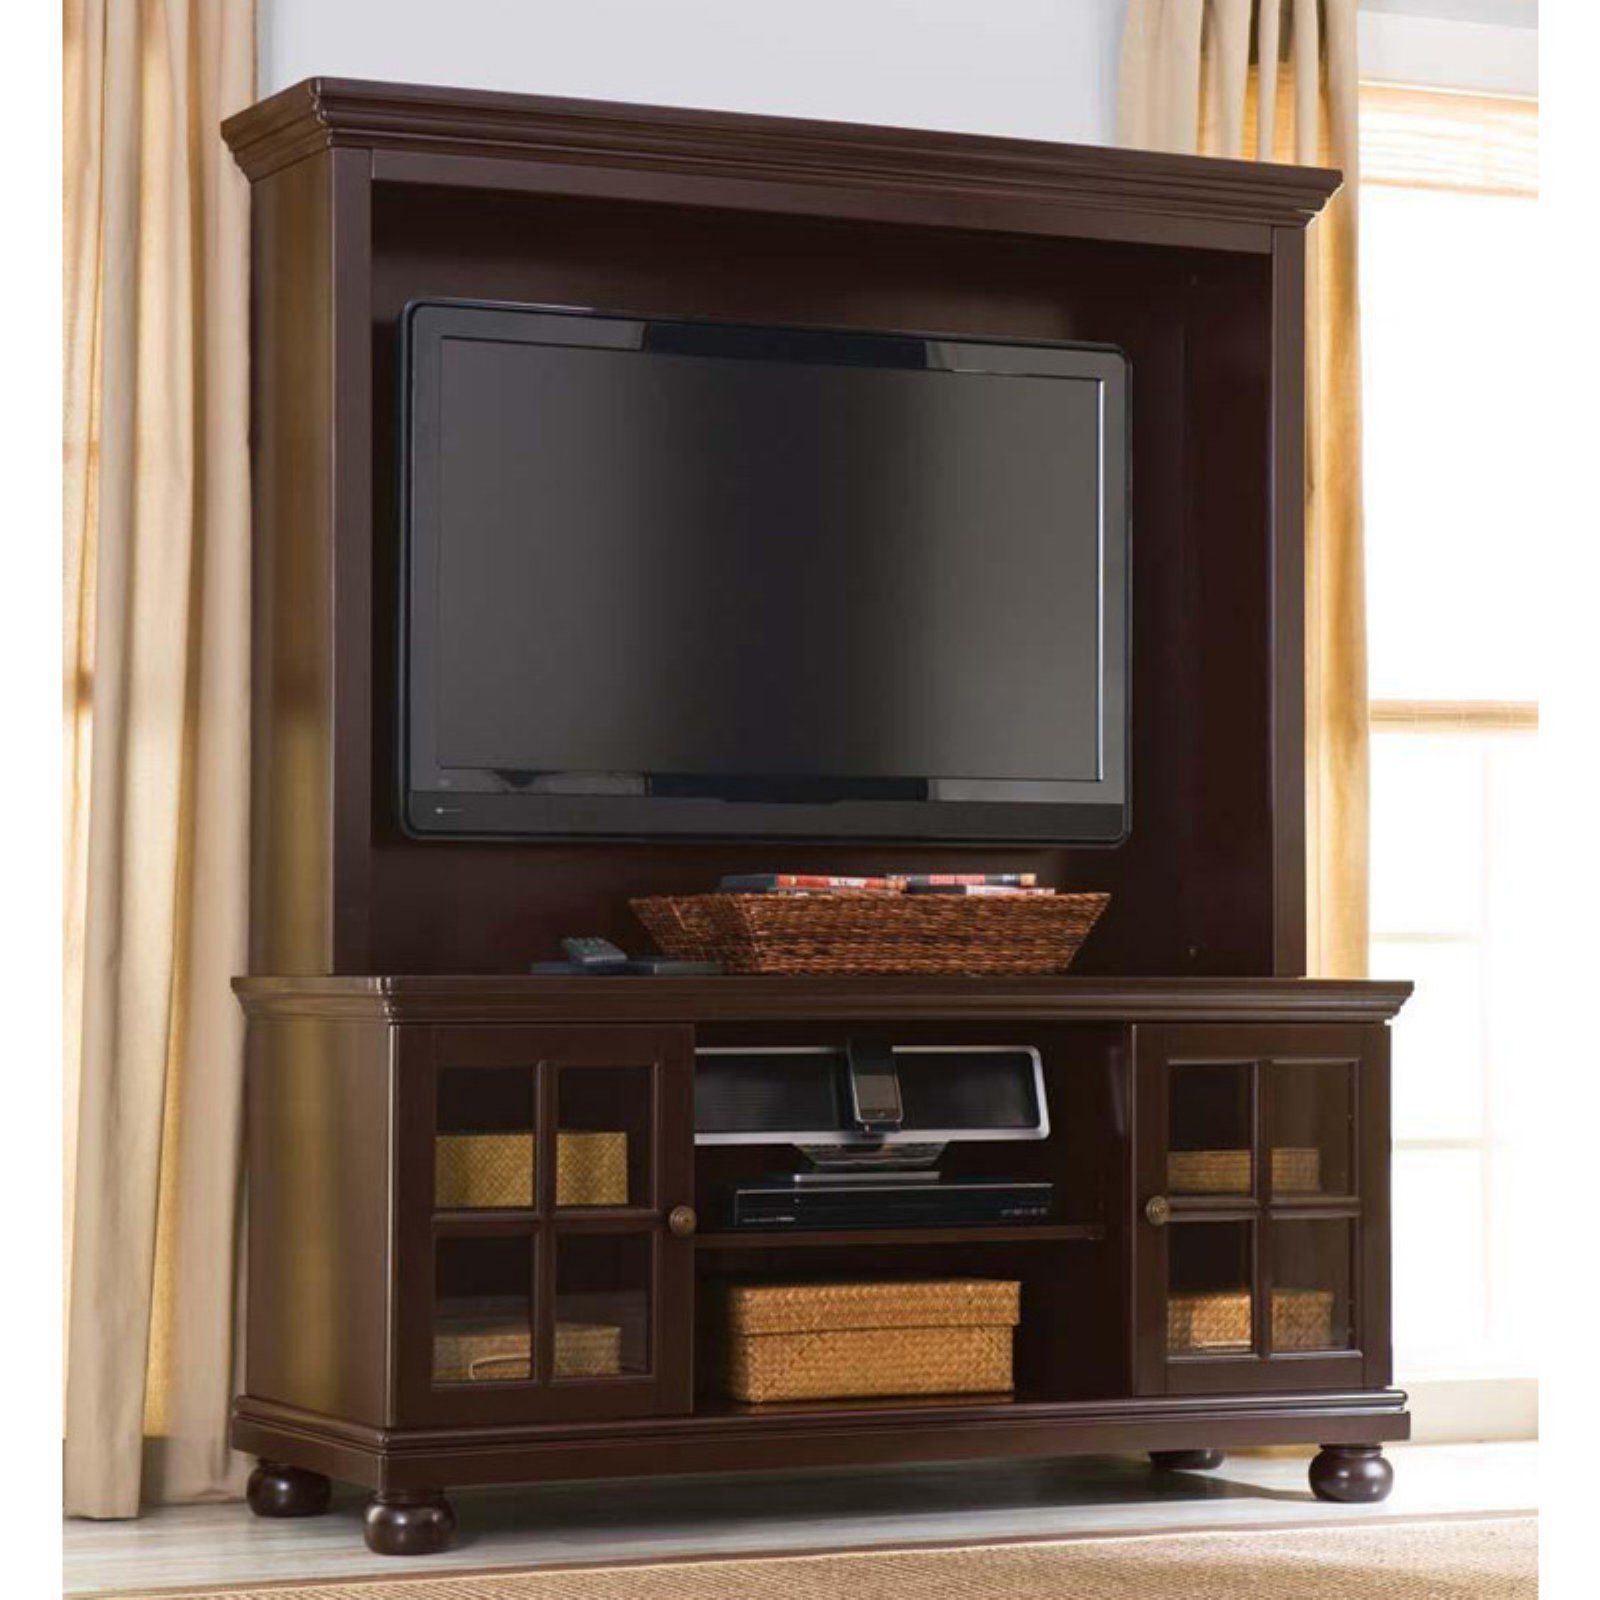 Better Home And Gardens 50" Flat Screen Tv Stand With Intended For Tv Stands For Tvs Up To 50" (Gallery 5 of 20)